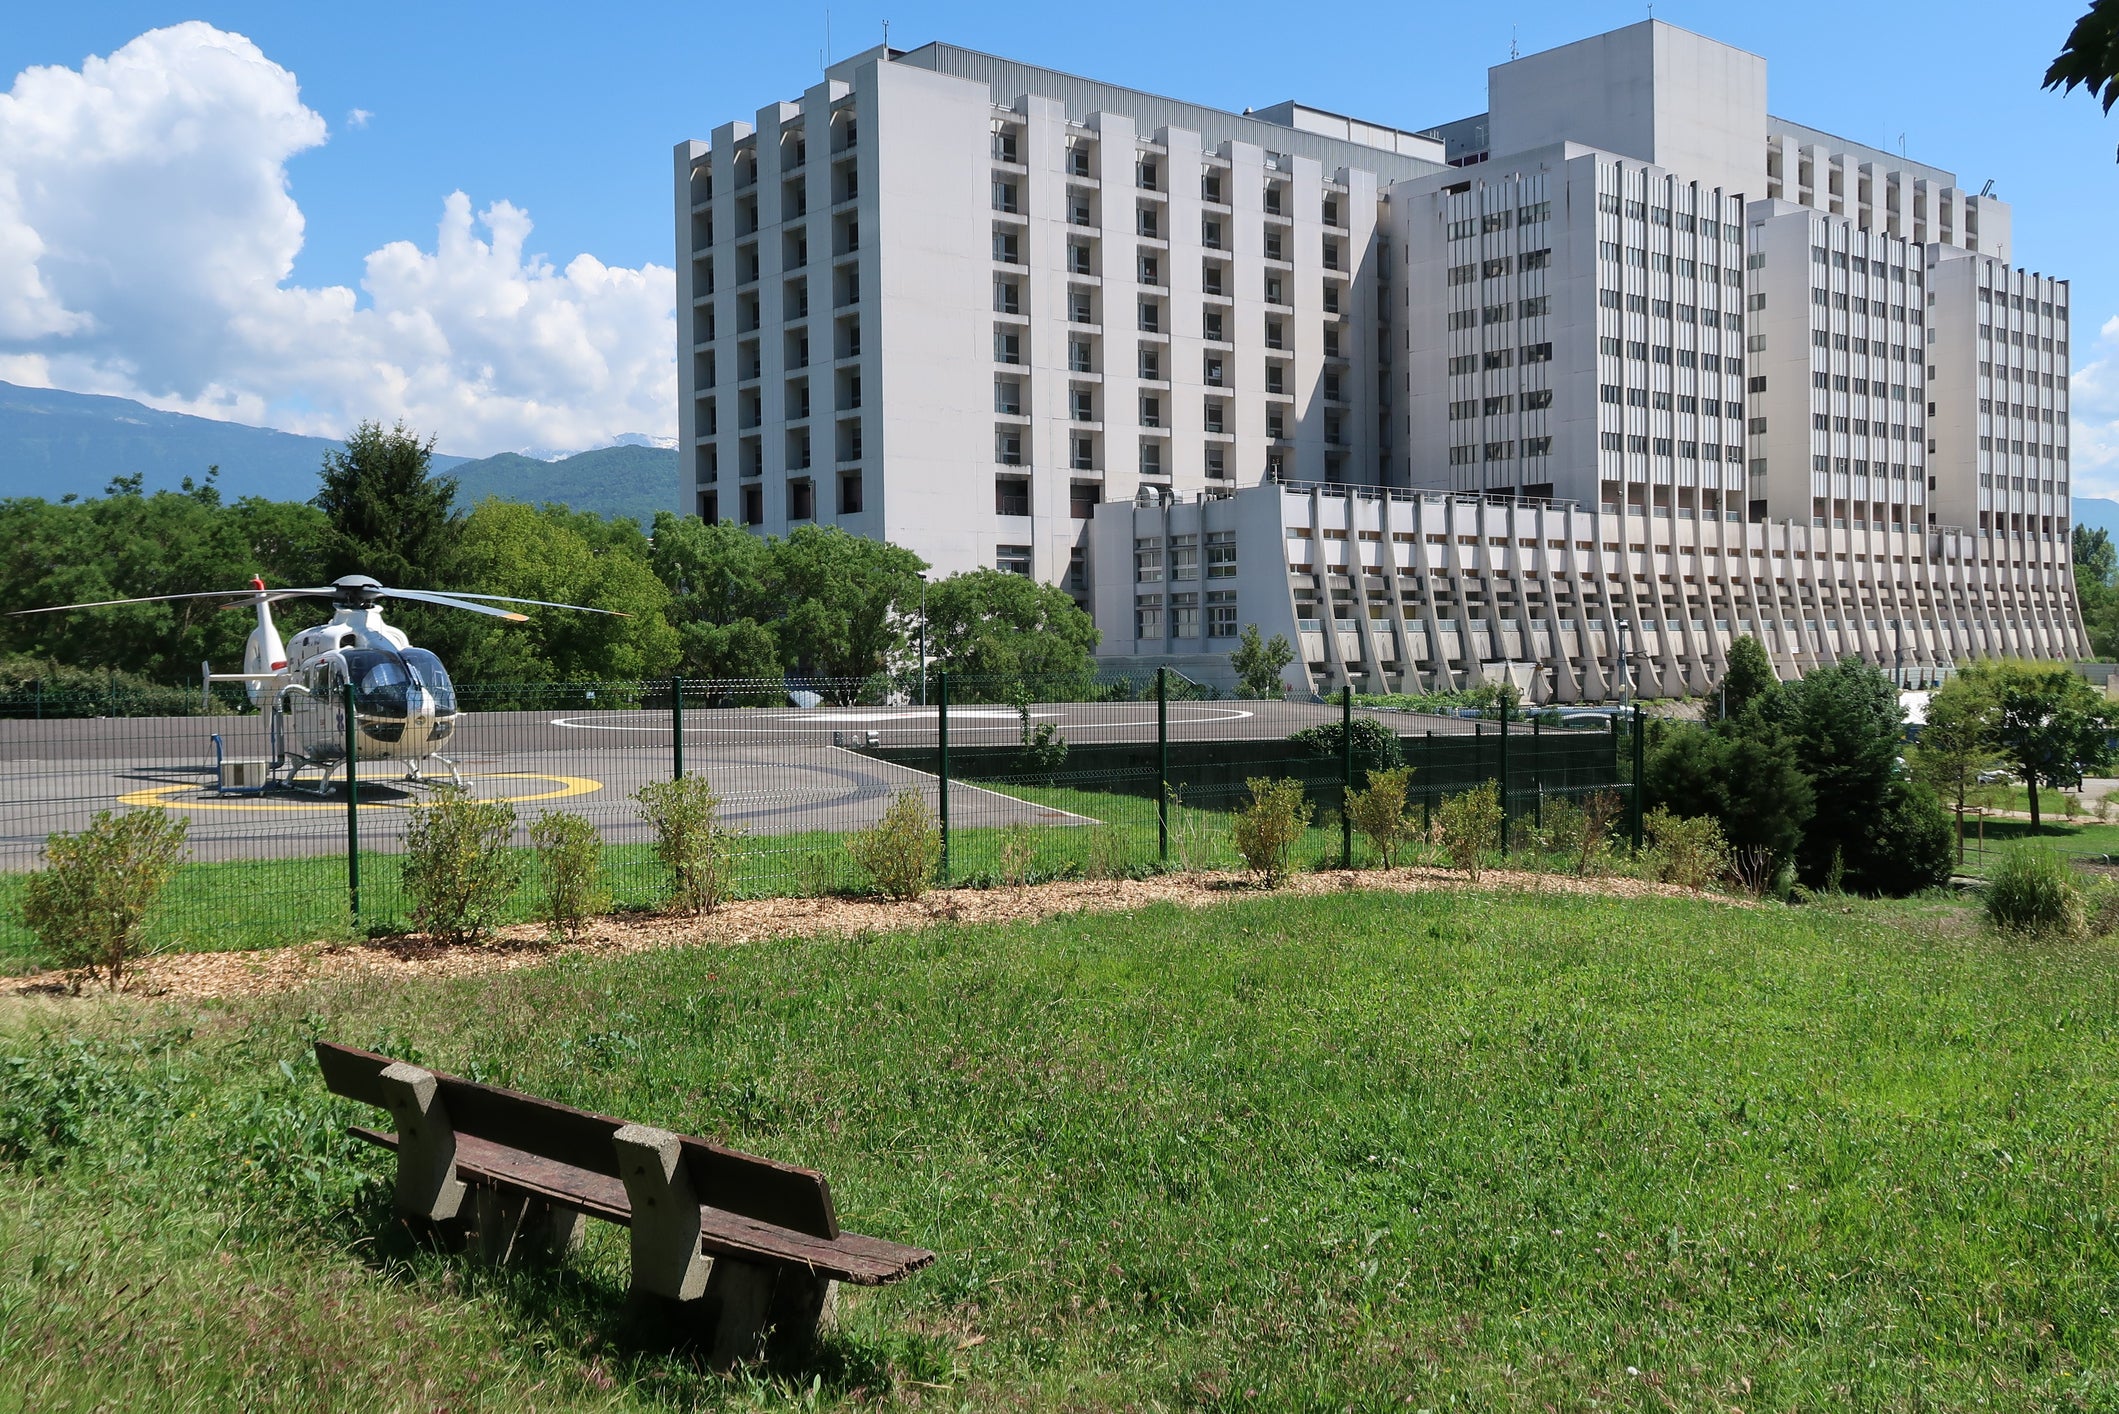 The man died at Grenoble teaching hospital